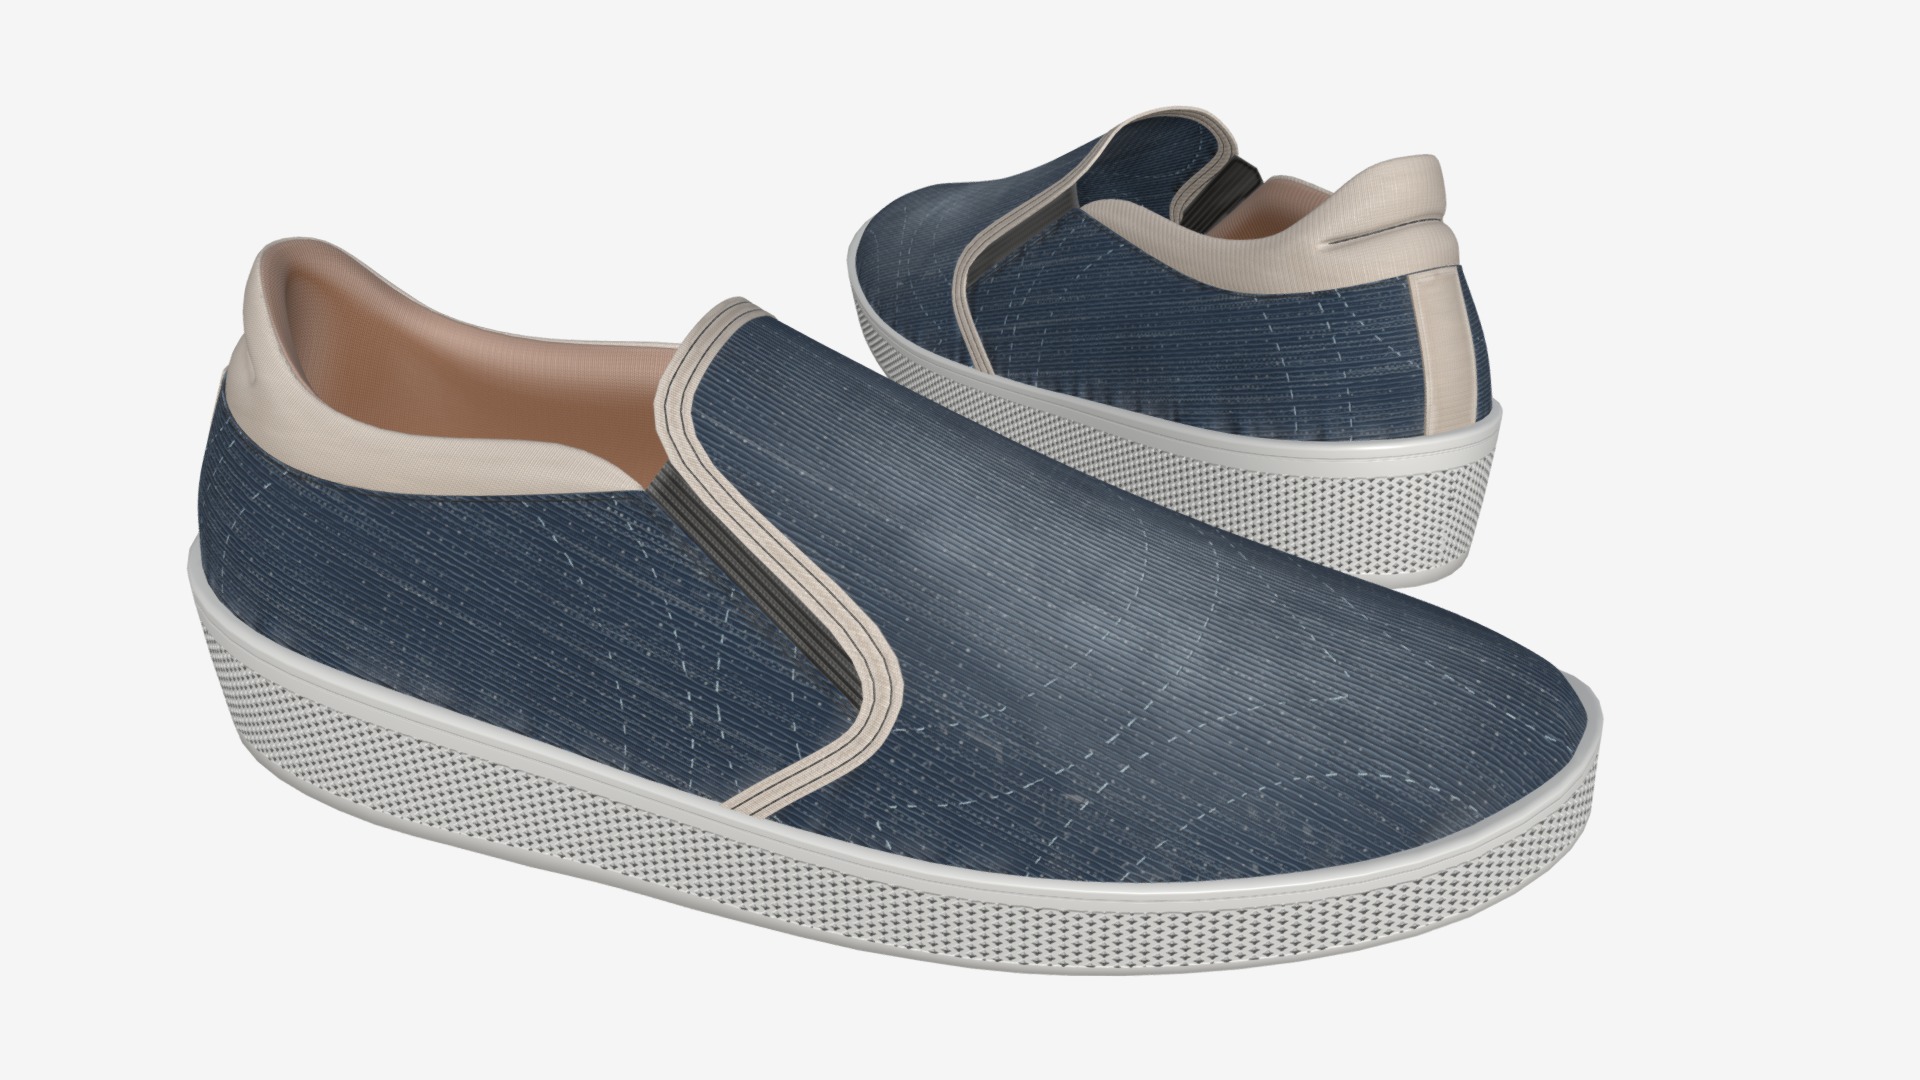 3D model shoes - This is a 3D model of the shoes. The 3D model is about a pair of shoes.